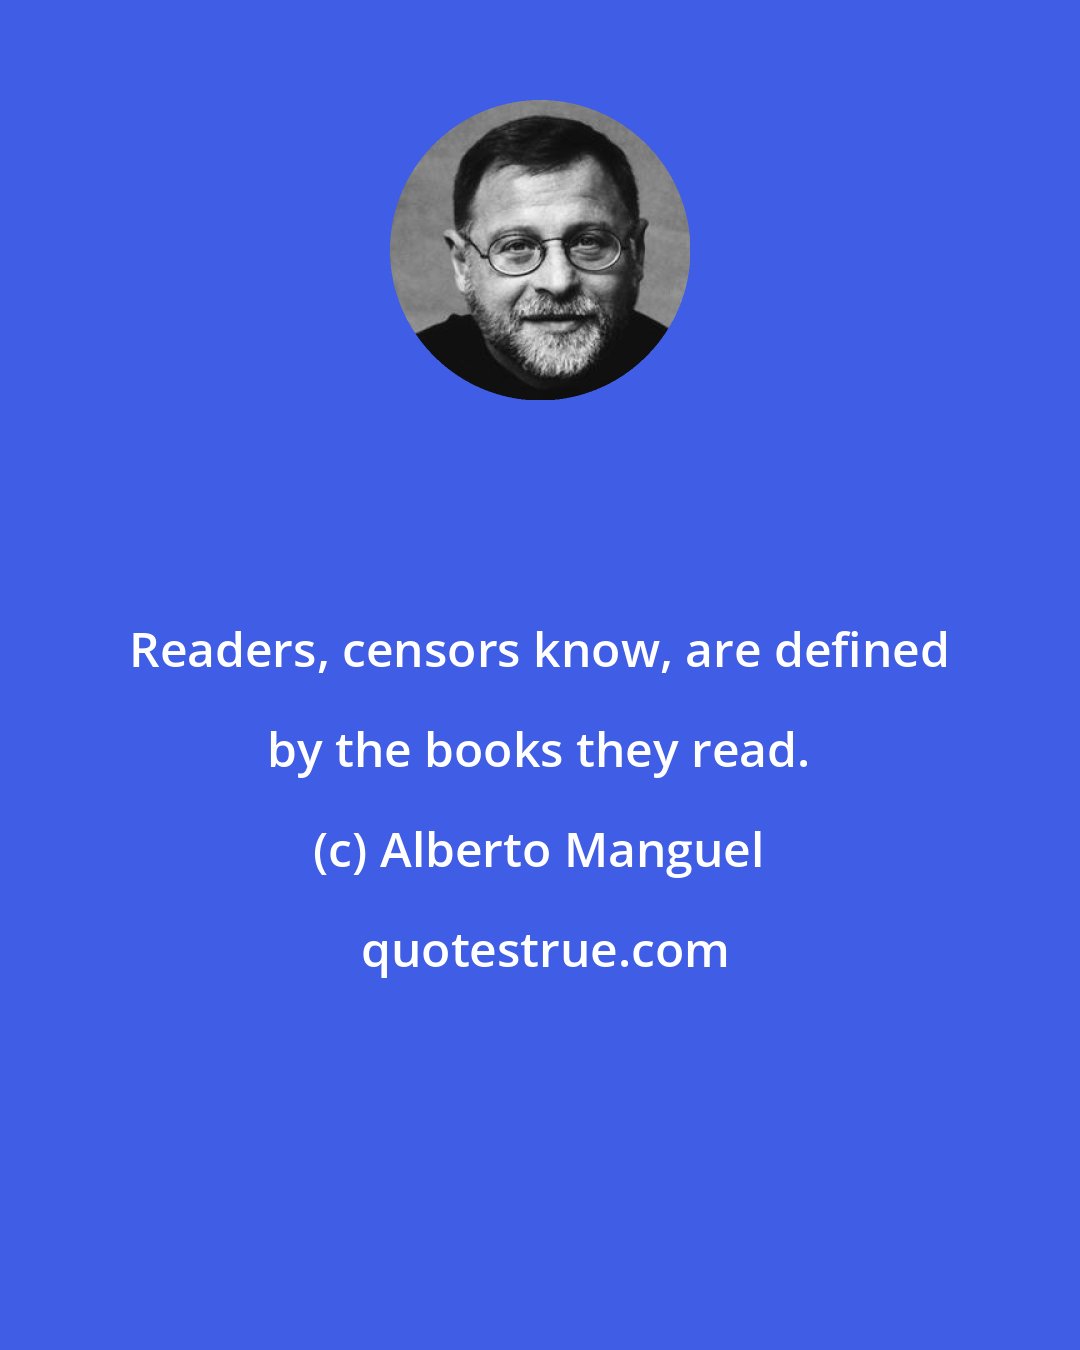 Alberto Manguel: Readers, censors know, are defined by the books they read.